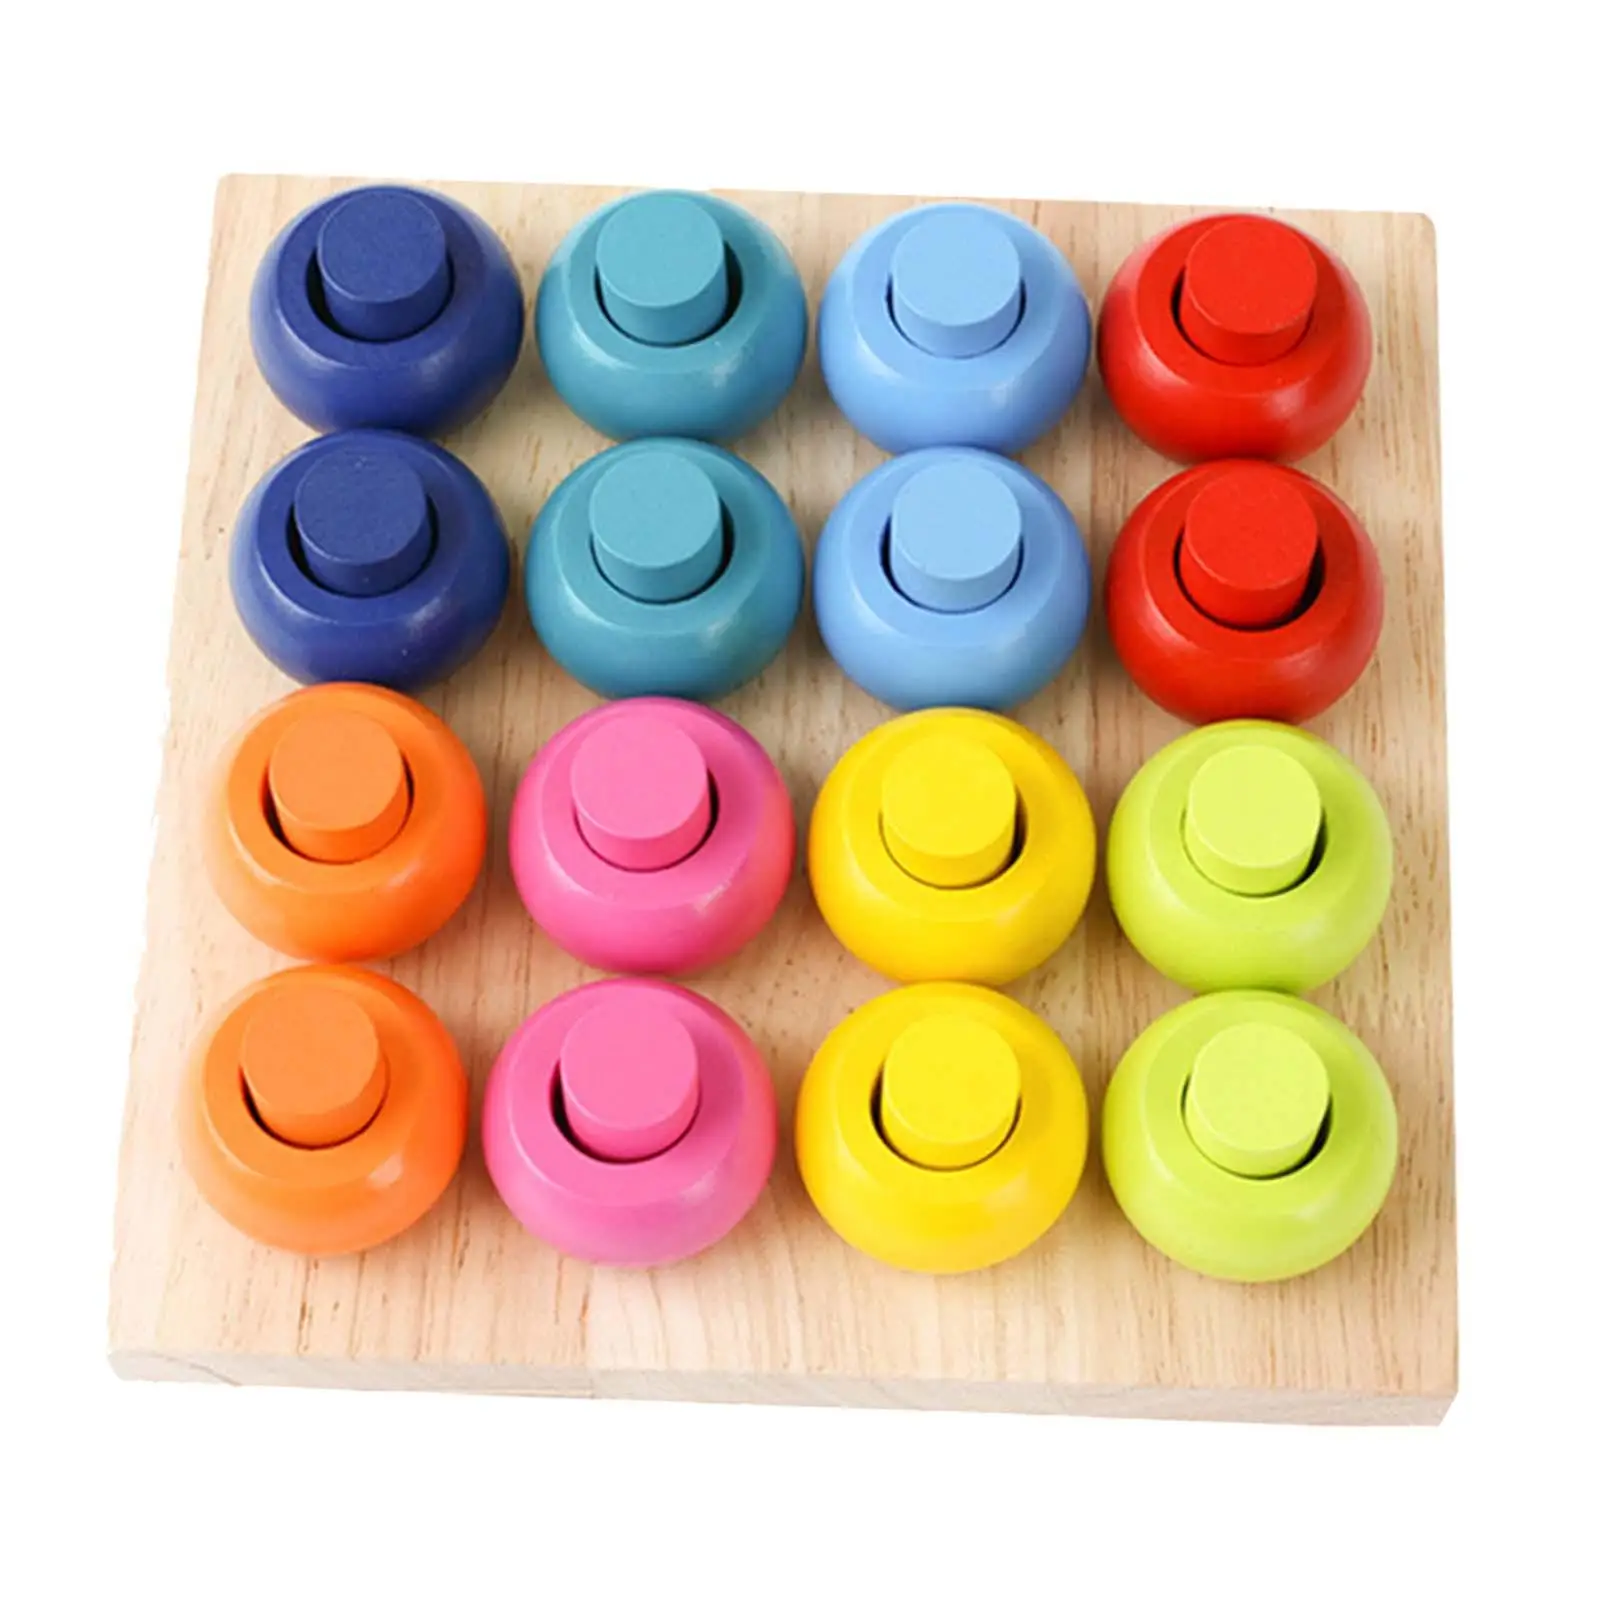 

Color Sorting Stacking Rings Board Educational Cognitive Montessori Interactive Learning Counting Toys Puzzle for Kids Preschool